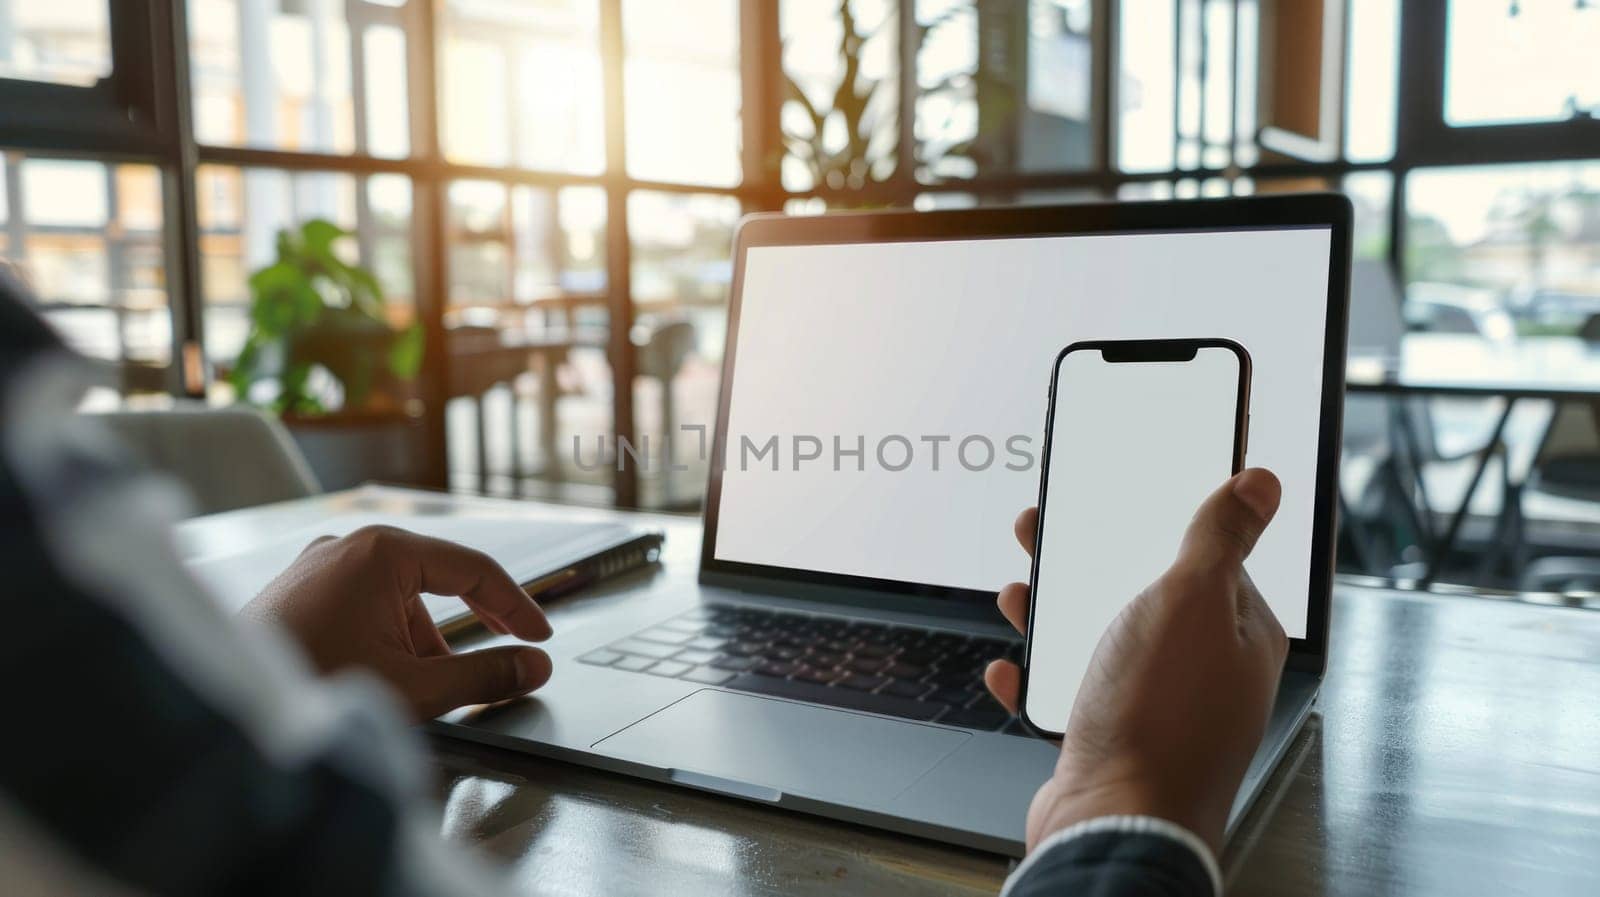 Mockup empty, a person is working on a laptop with a white screen, another person is holding a phone with a white screen, modern office in the background by golfmerrymaker